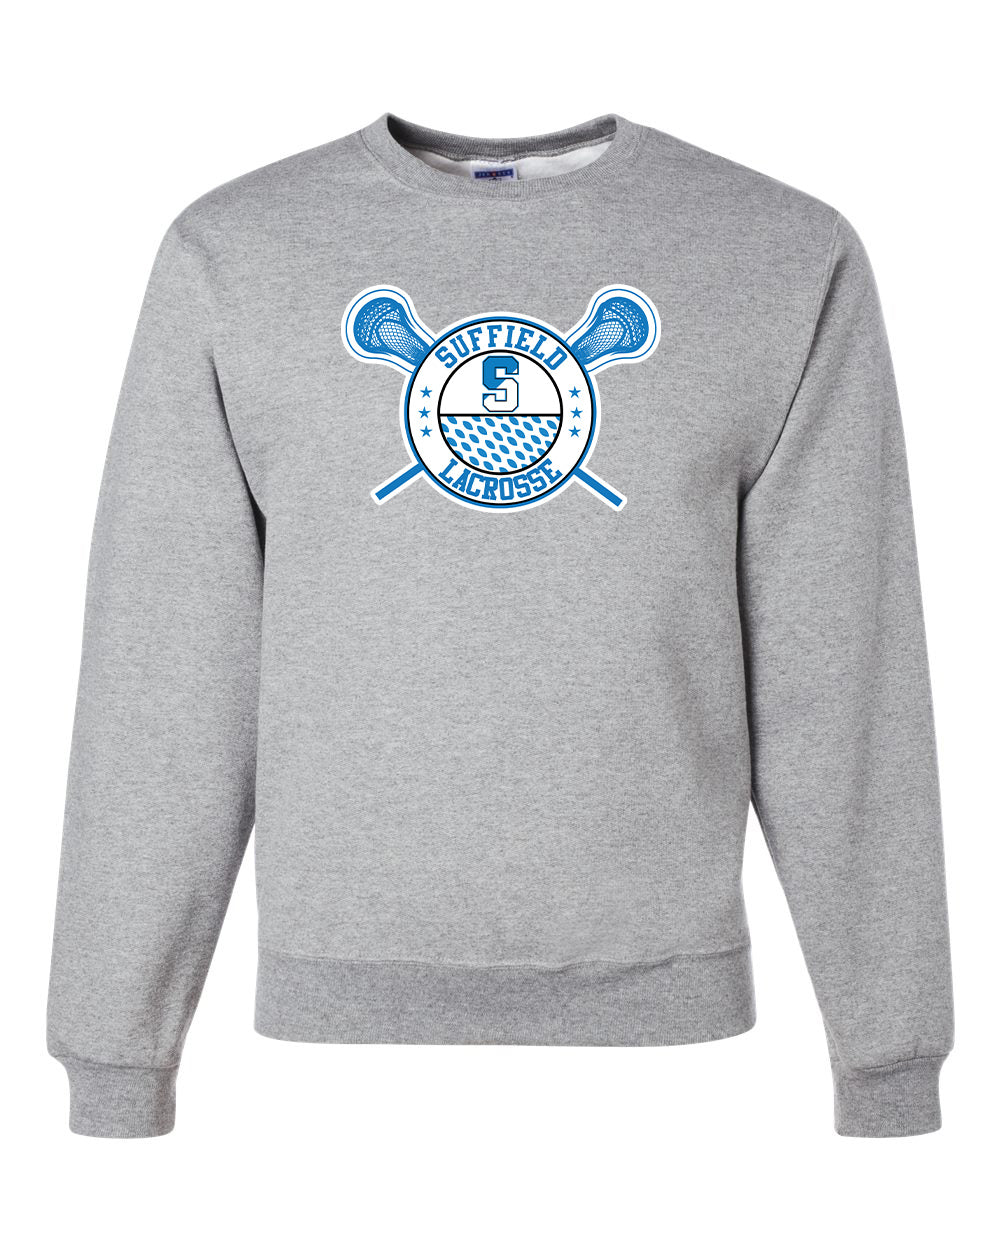 Suffield Youth Lacrosse - Adult Crewneck "Circle" - 562MR (color options available)